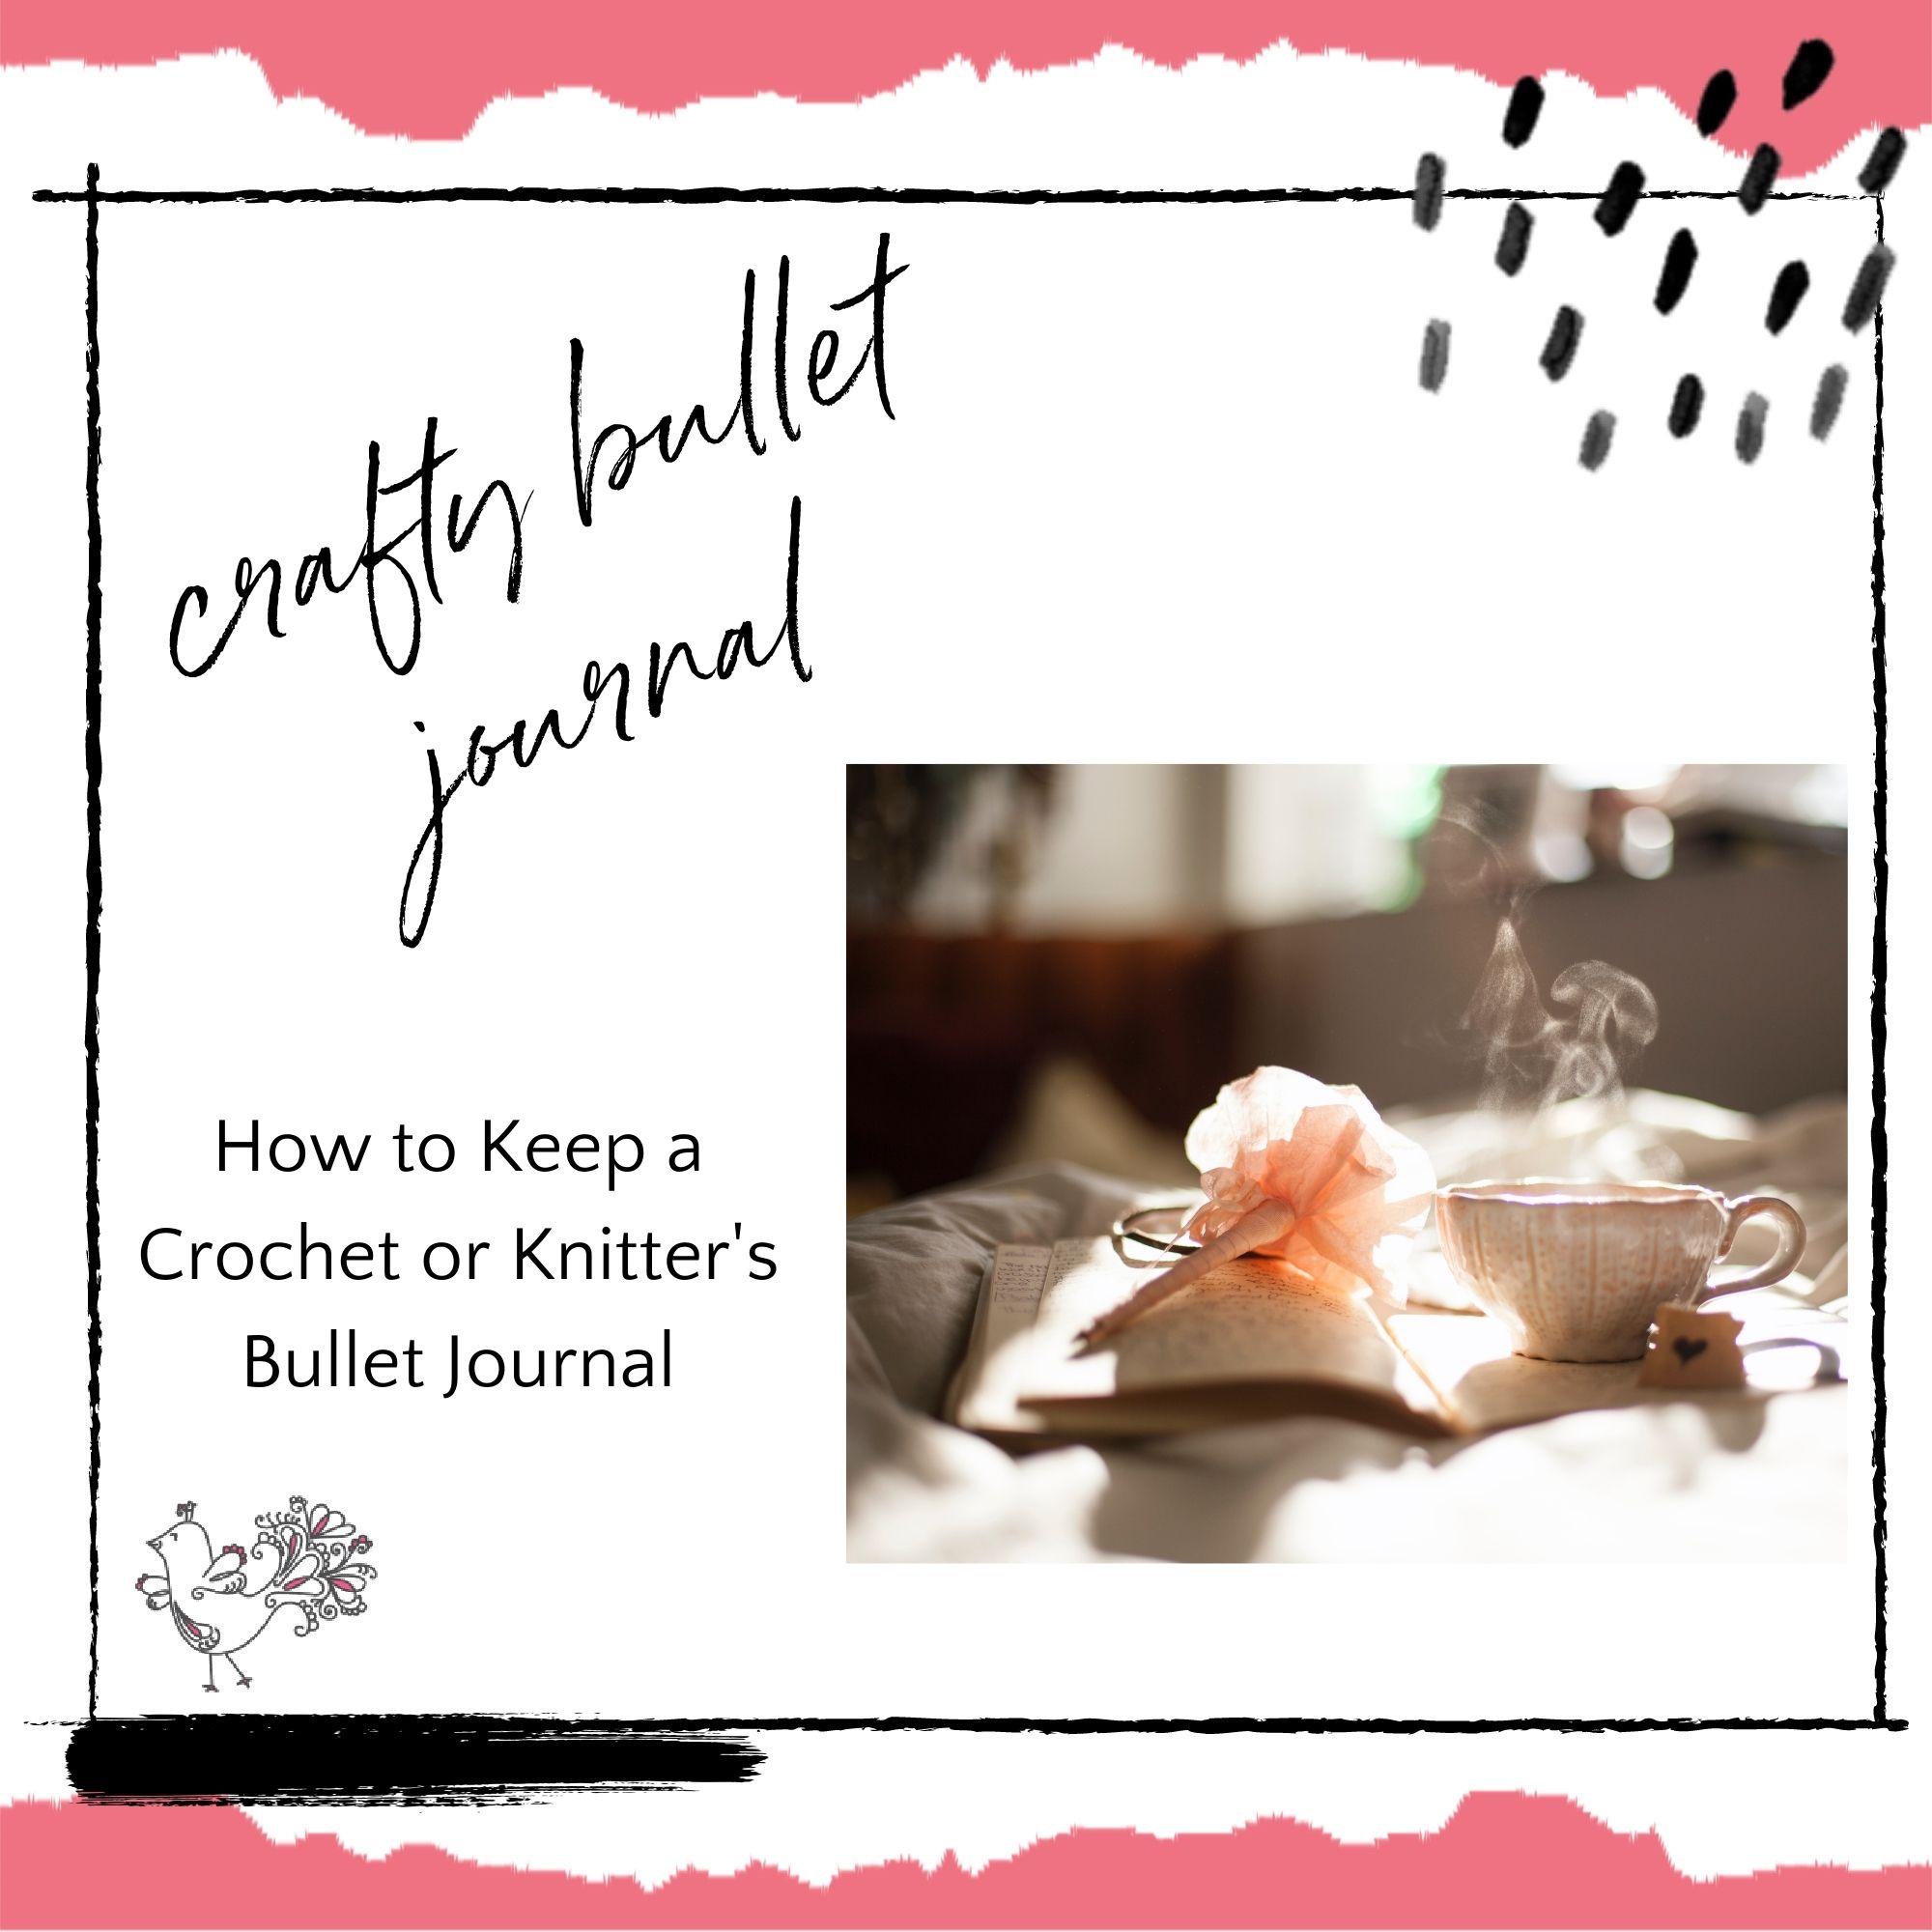 how to keep a crochet or knitter's bullet journal